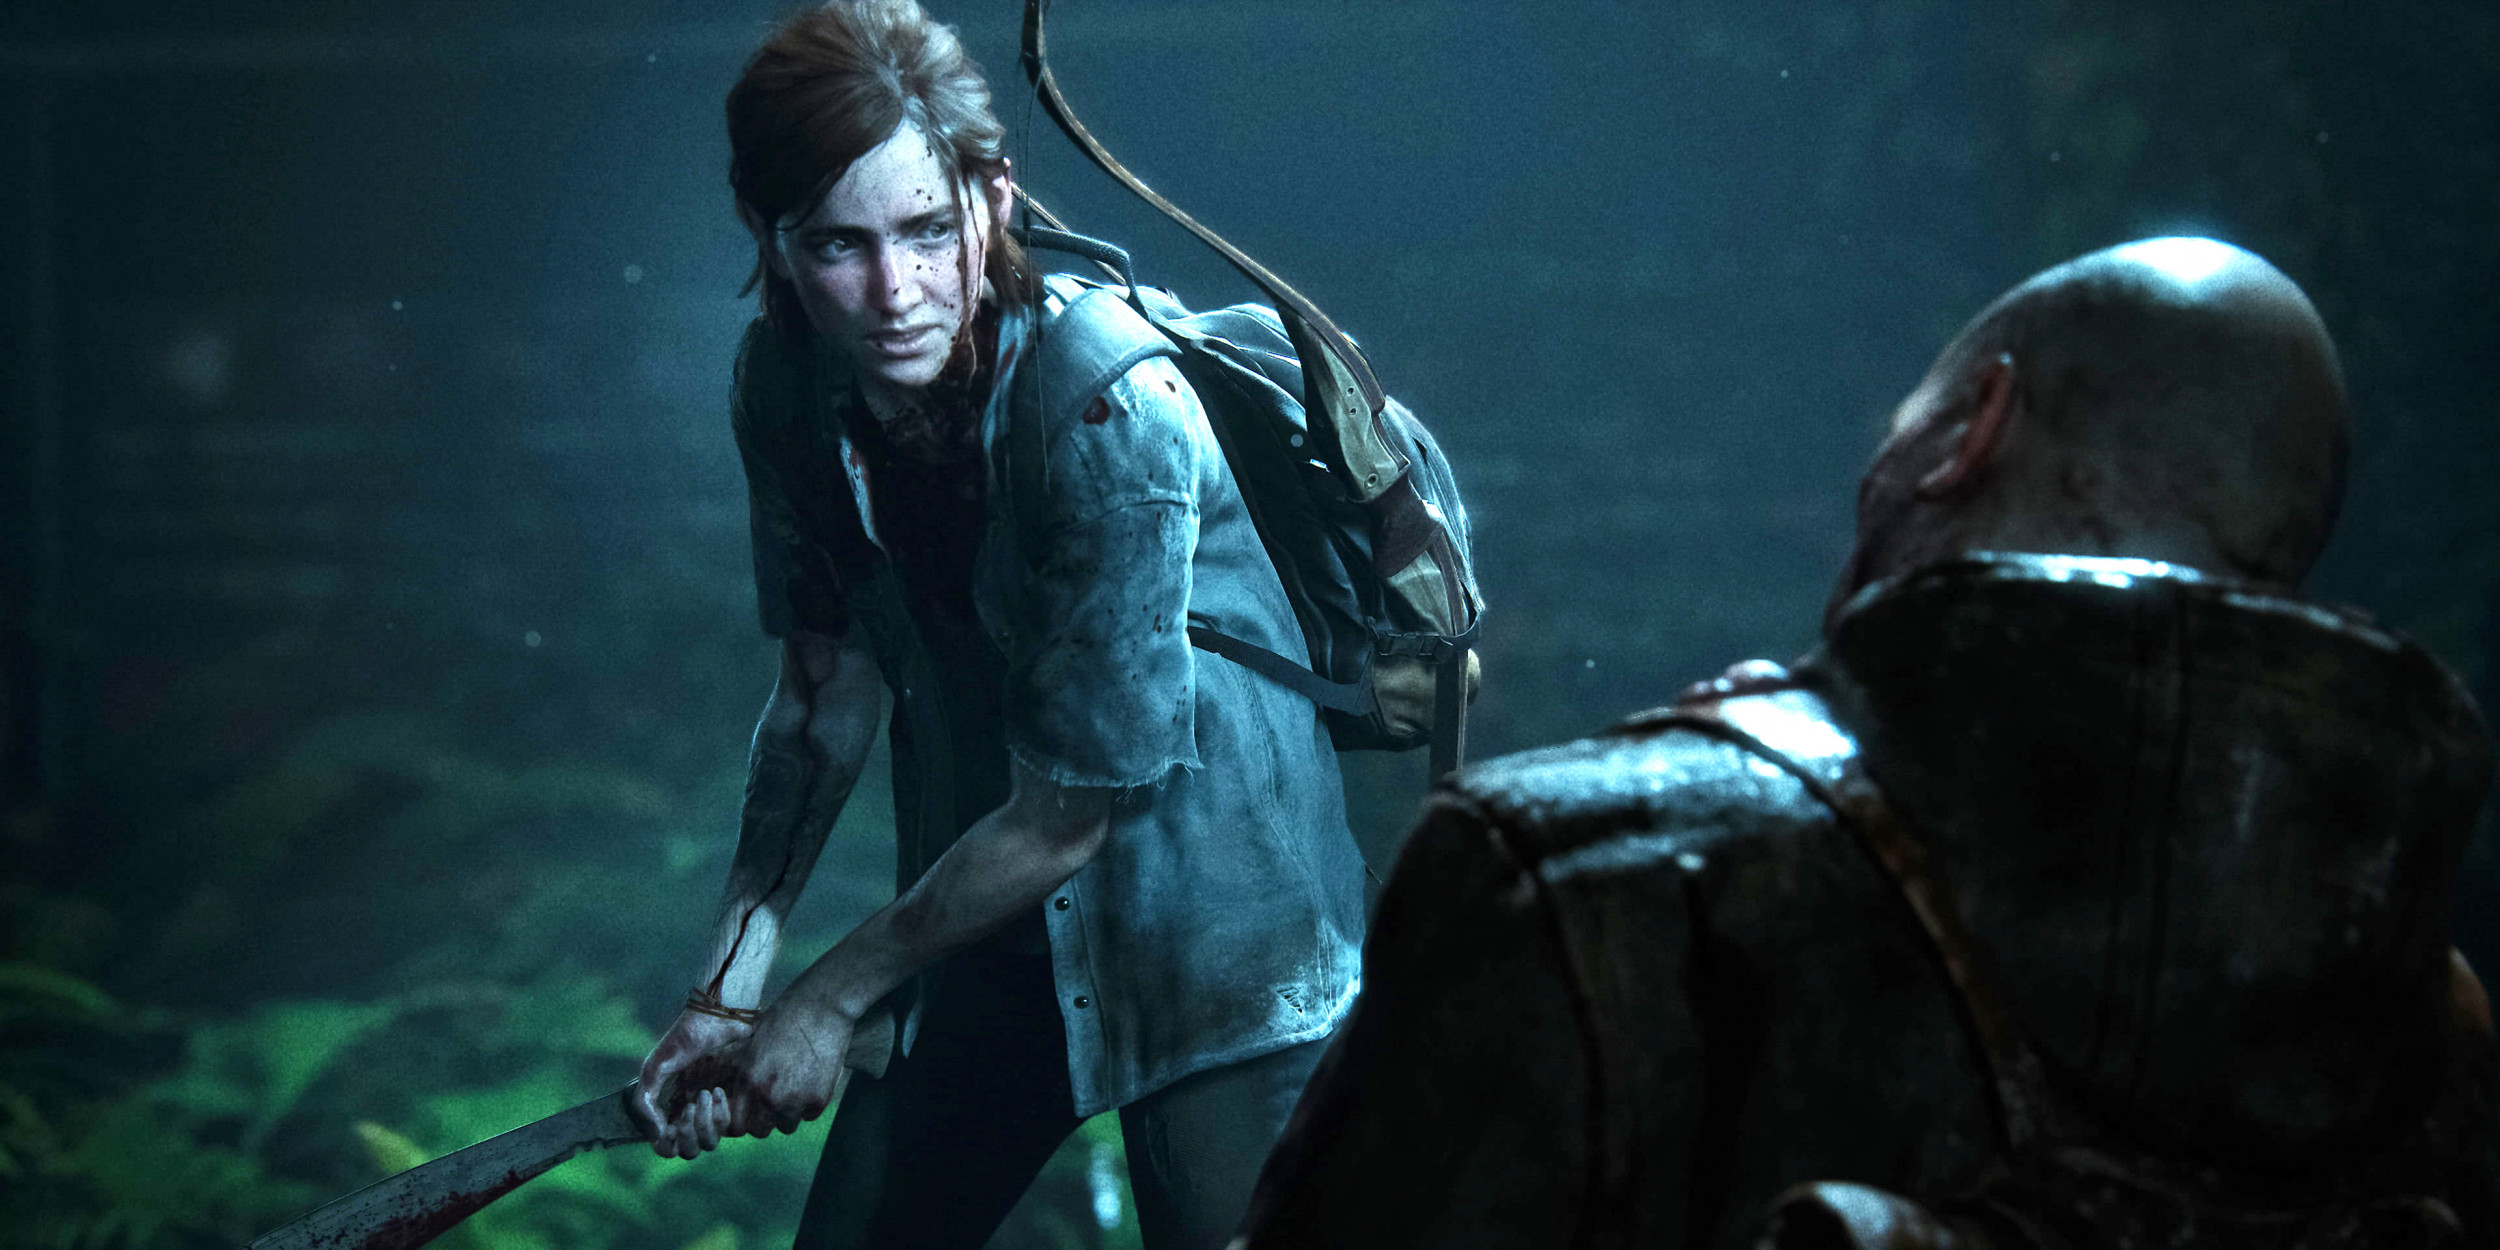 The Last of Us Part II: How old is Ellie in the game?